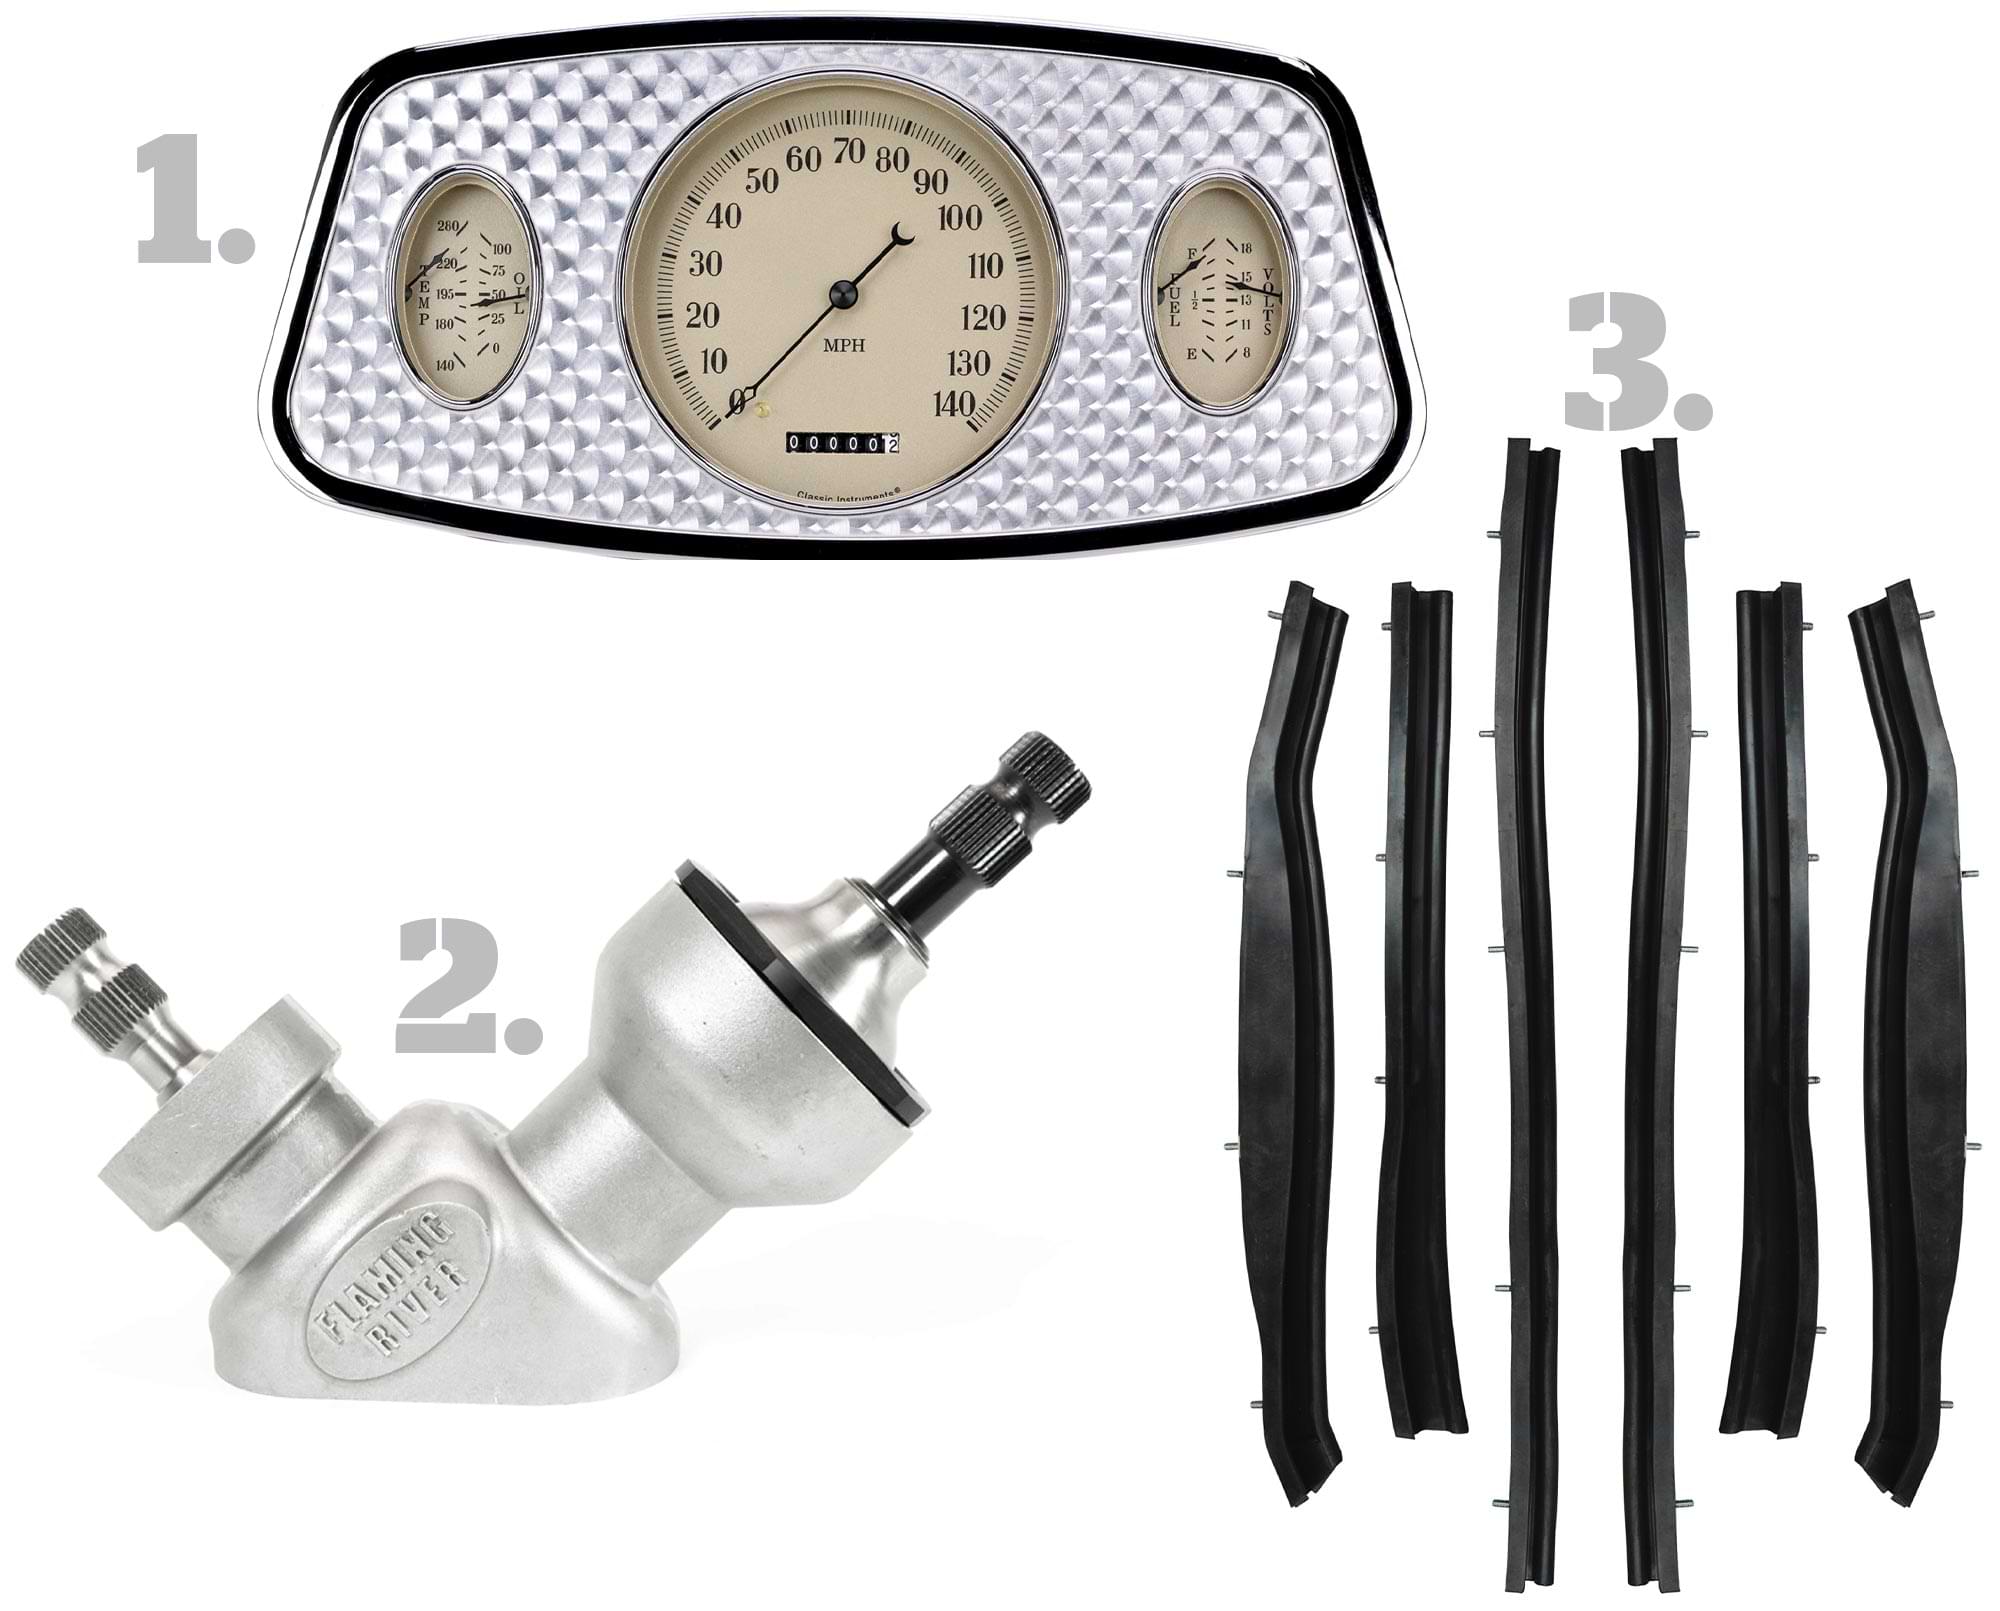 1. Classic Instruments 1933–1934 Ford car electronic-operation gauges; 2. Flaming River's VDOG 90-degree steering gearbox; 3. Steele Rubber Products' Convertible Roof Rail Weatherstrips (PN 70-4102-65)